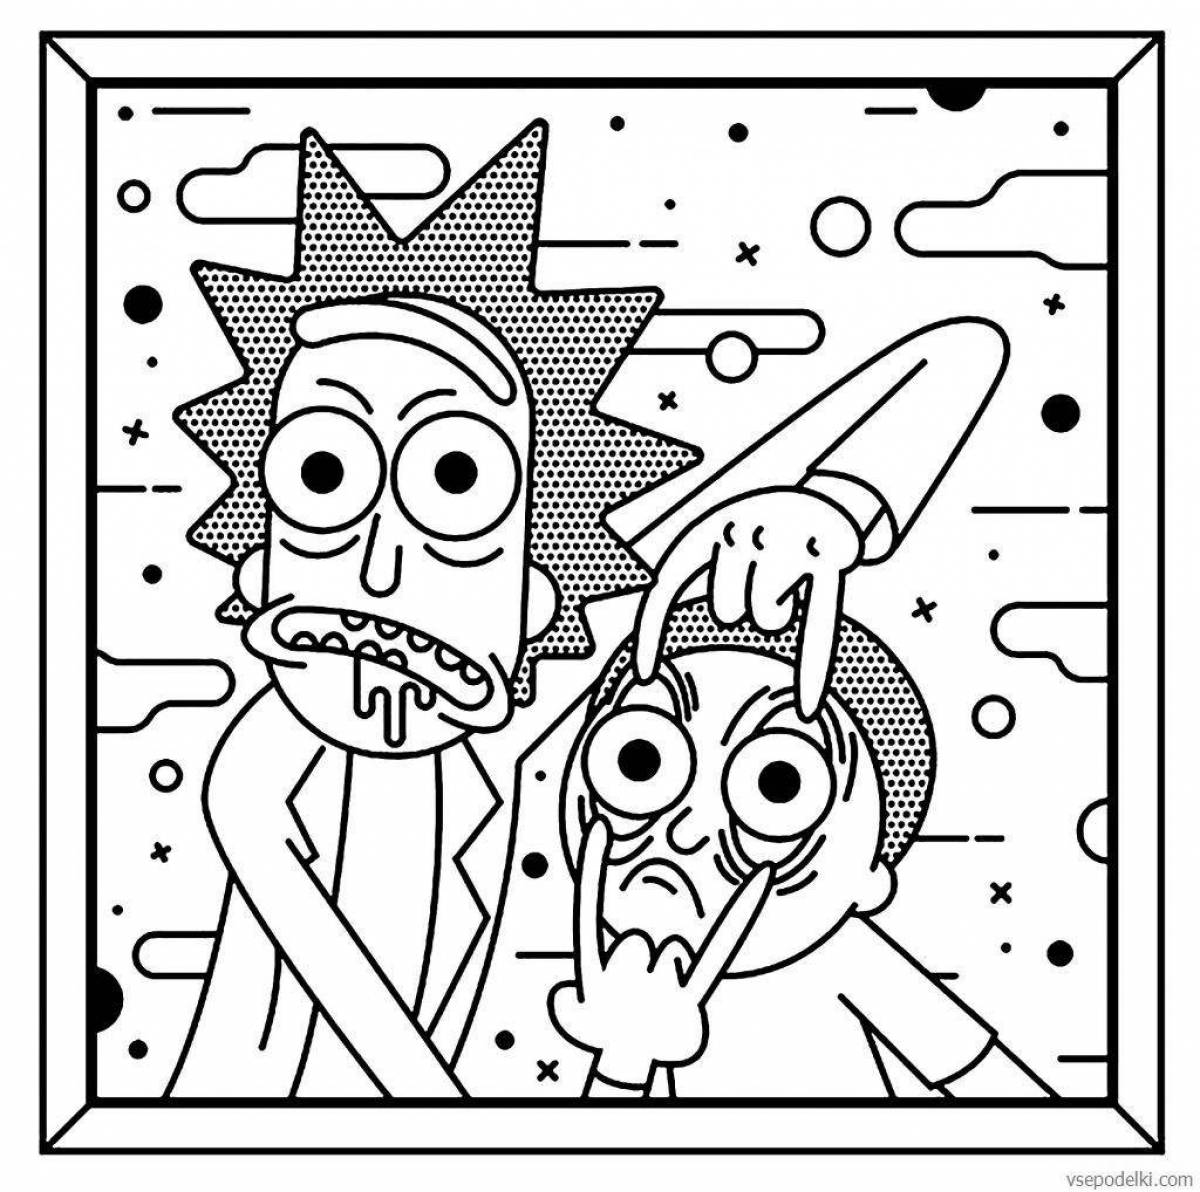 Laughing morty coloring book